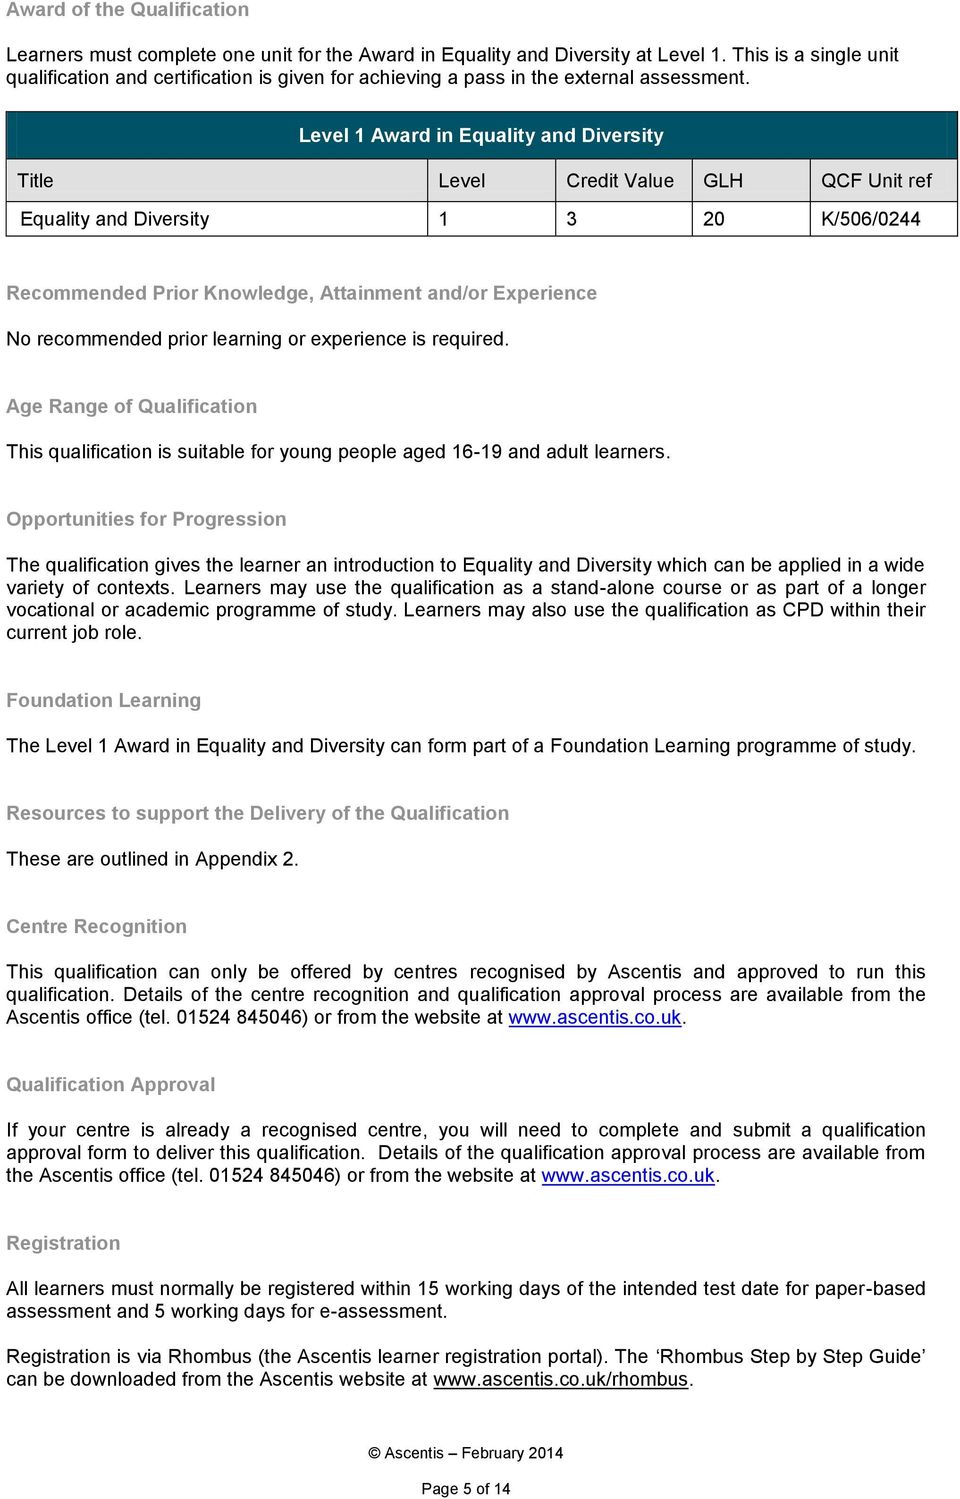 Level 1 Award in Equality and Diversity Title Level Credit Value GLH QCF Unit ref Equality and Diversity 1 3 20 K/506/0244 Recommended Prior Knowledge, Attainment and/or Experience No recommended